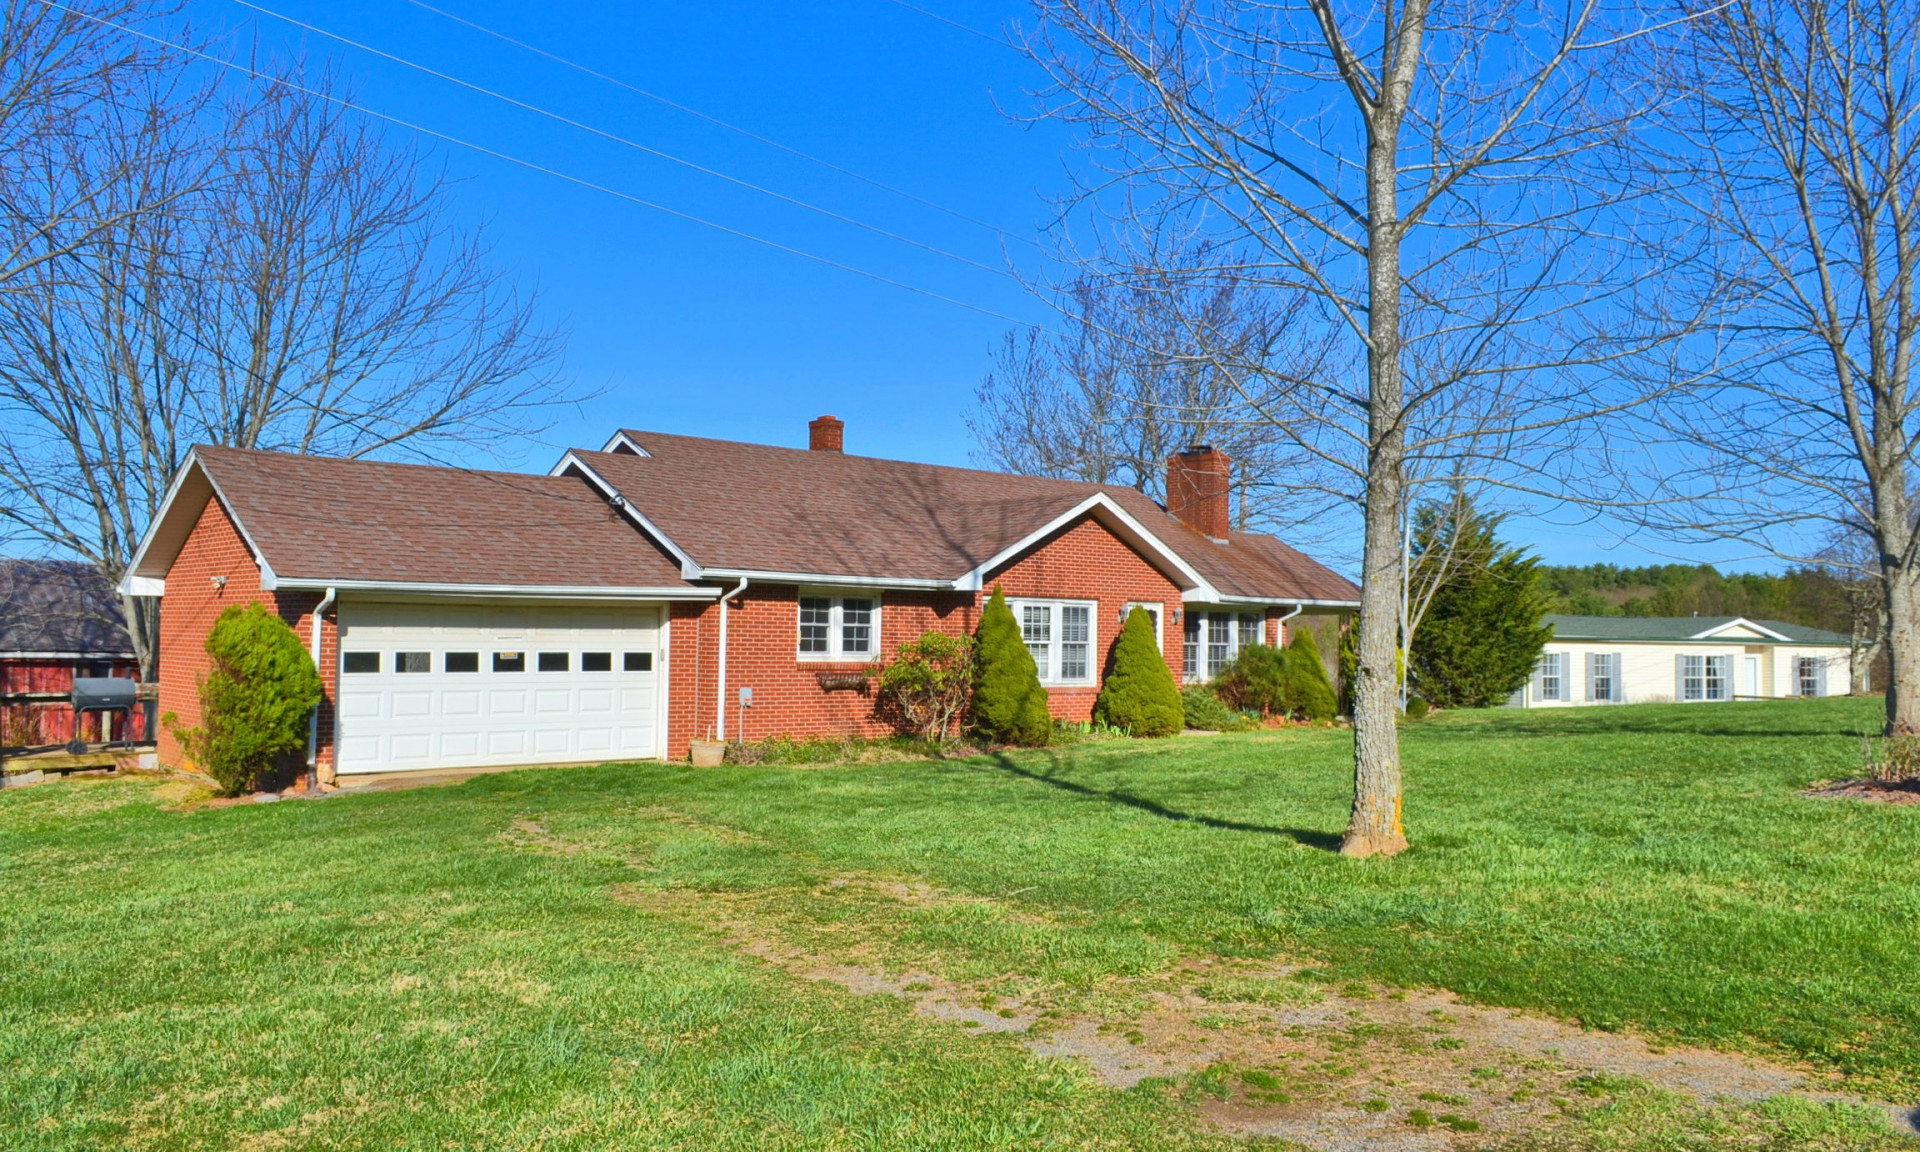 This 10 acre farm along the Blue Ridge Parkway is a young farmer's dream.  Complete with two homes, barns, outbuildings, pastures, views, and spectacular mountain setting in the Hillsville area of Carroll County, this property is ideal for your Virginia mountain farm or retreat.